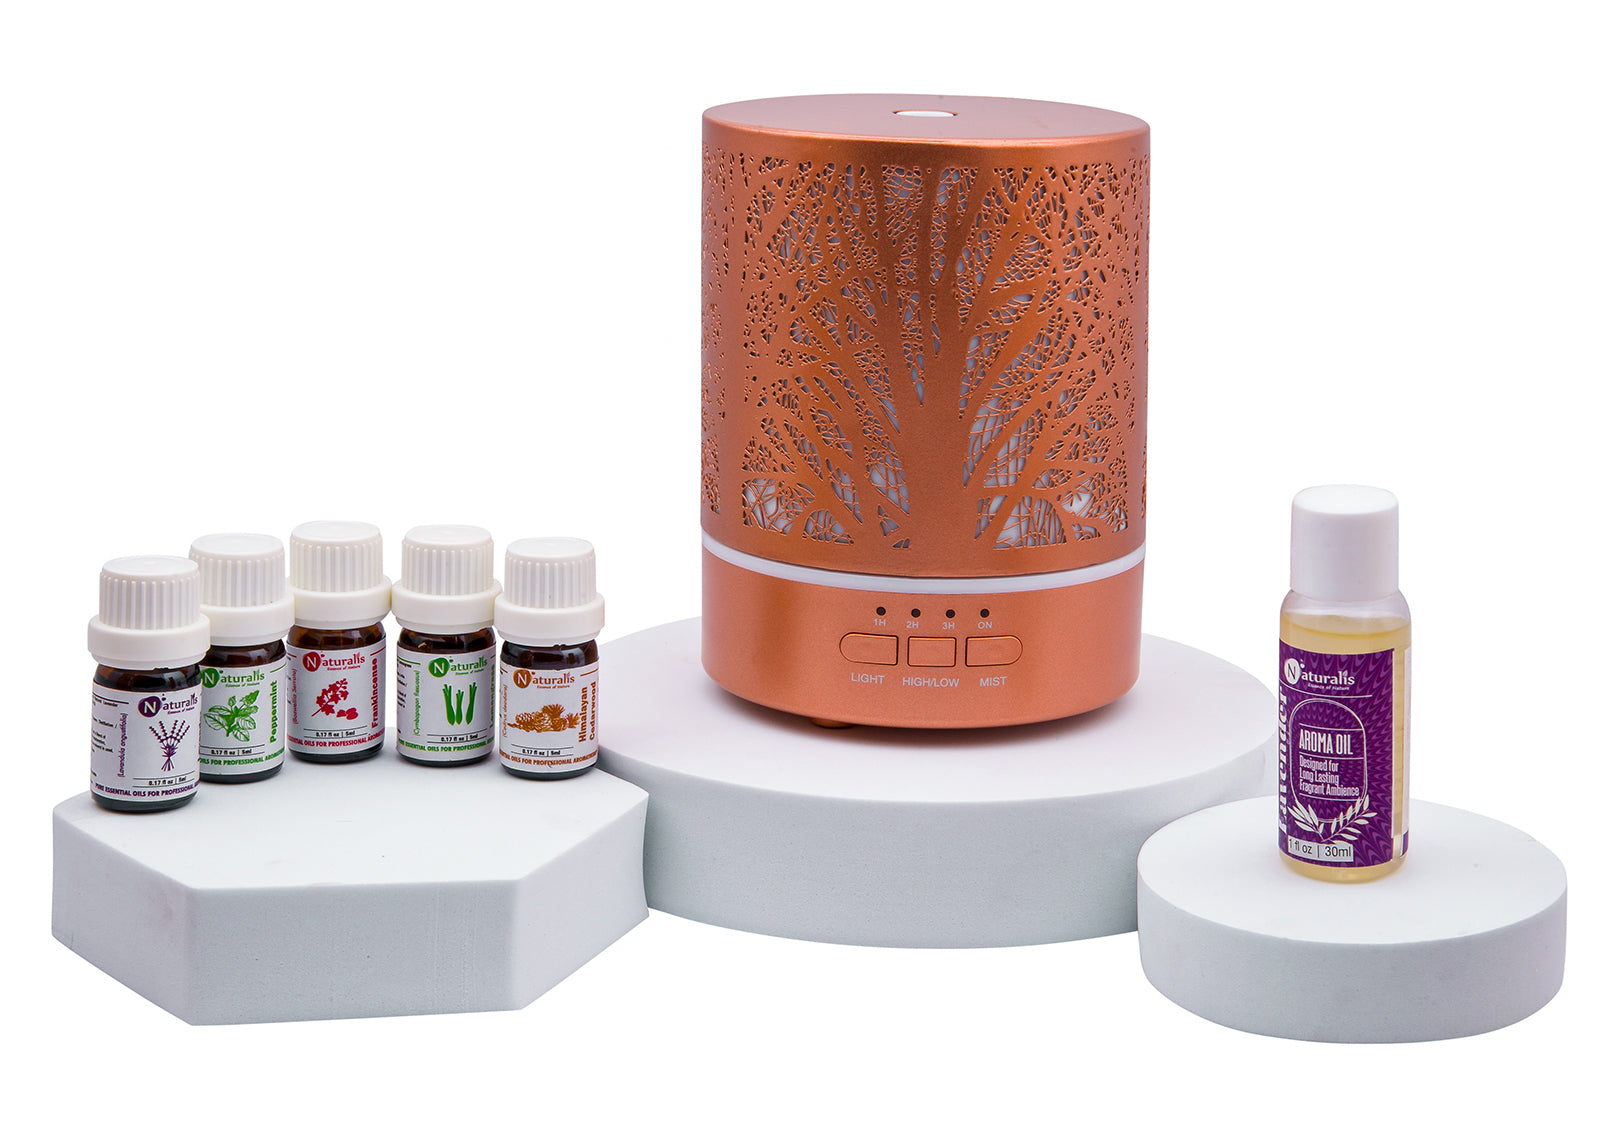 Naturalis Essence of Nature Rose Gold Mist Ultrasonic Aroma Diffuser & Humidifier with 30ml Diffuser Oil Design for Long Lasting Fragrant Ambience